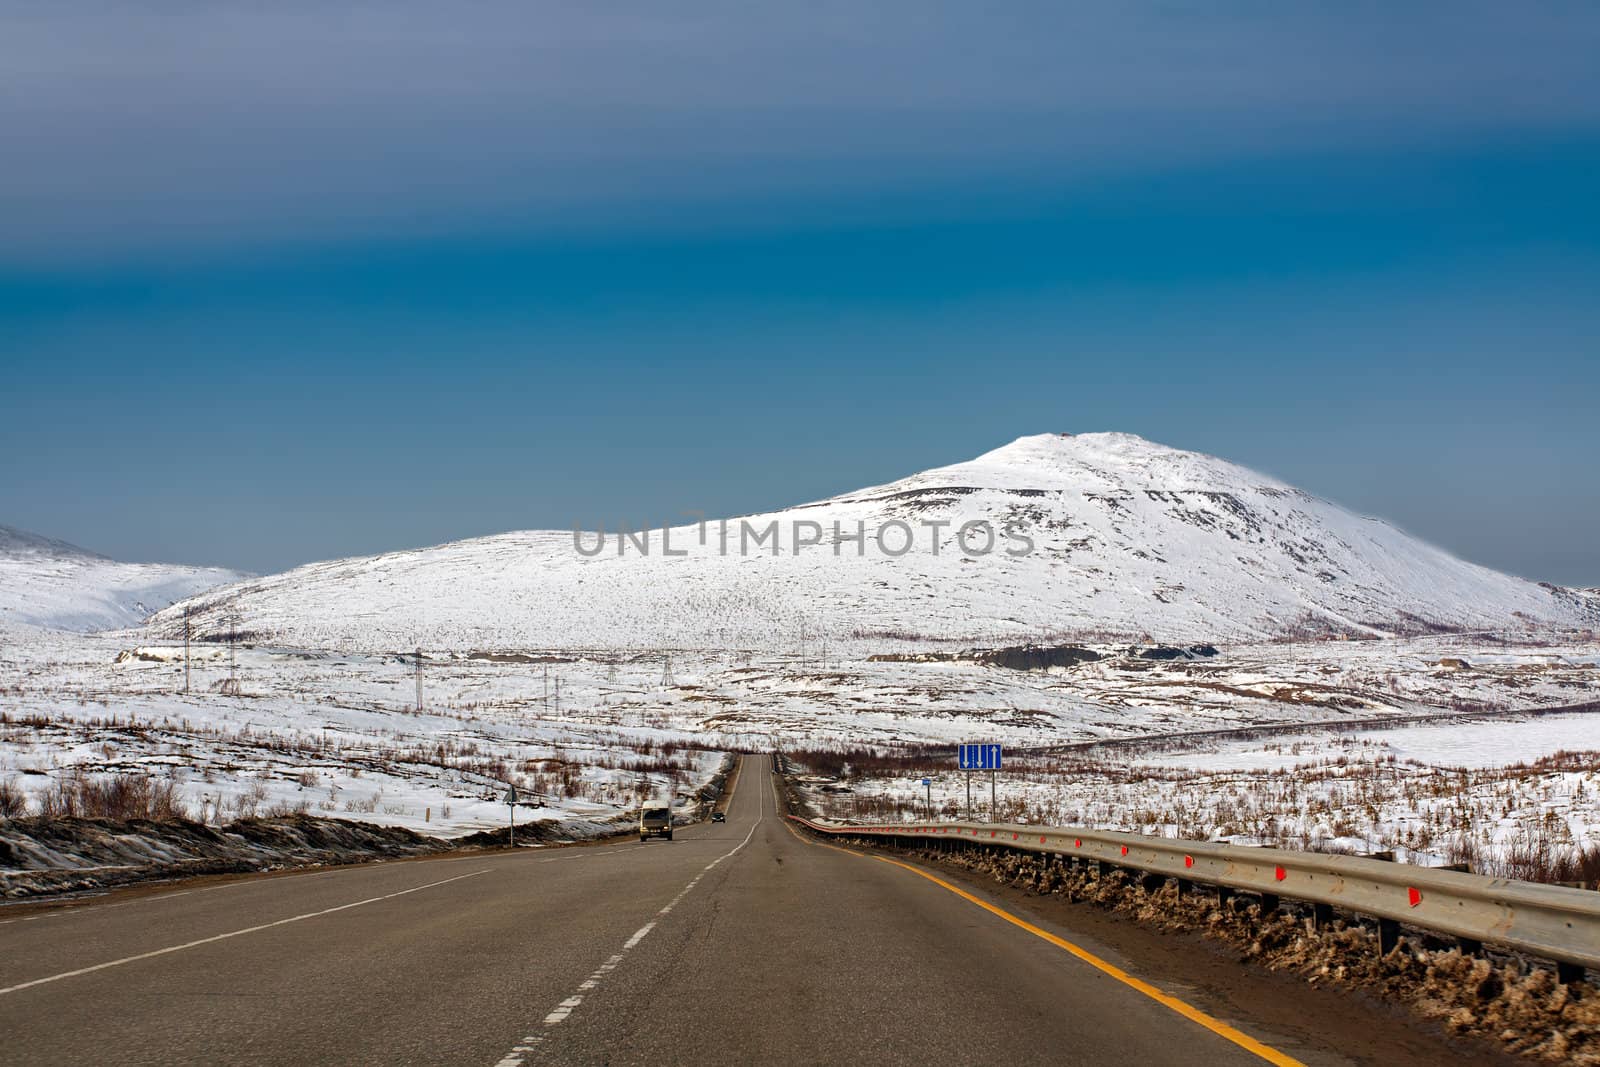 Landscape view of the mountains Hibiny Murmansk Region, Russia